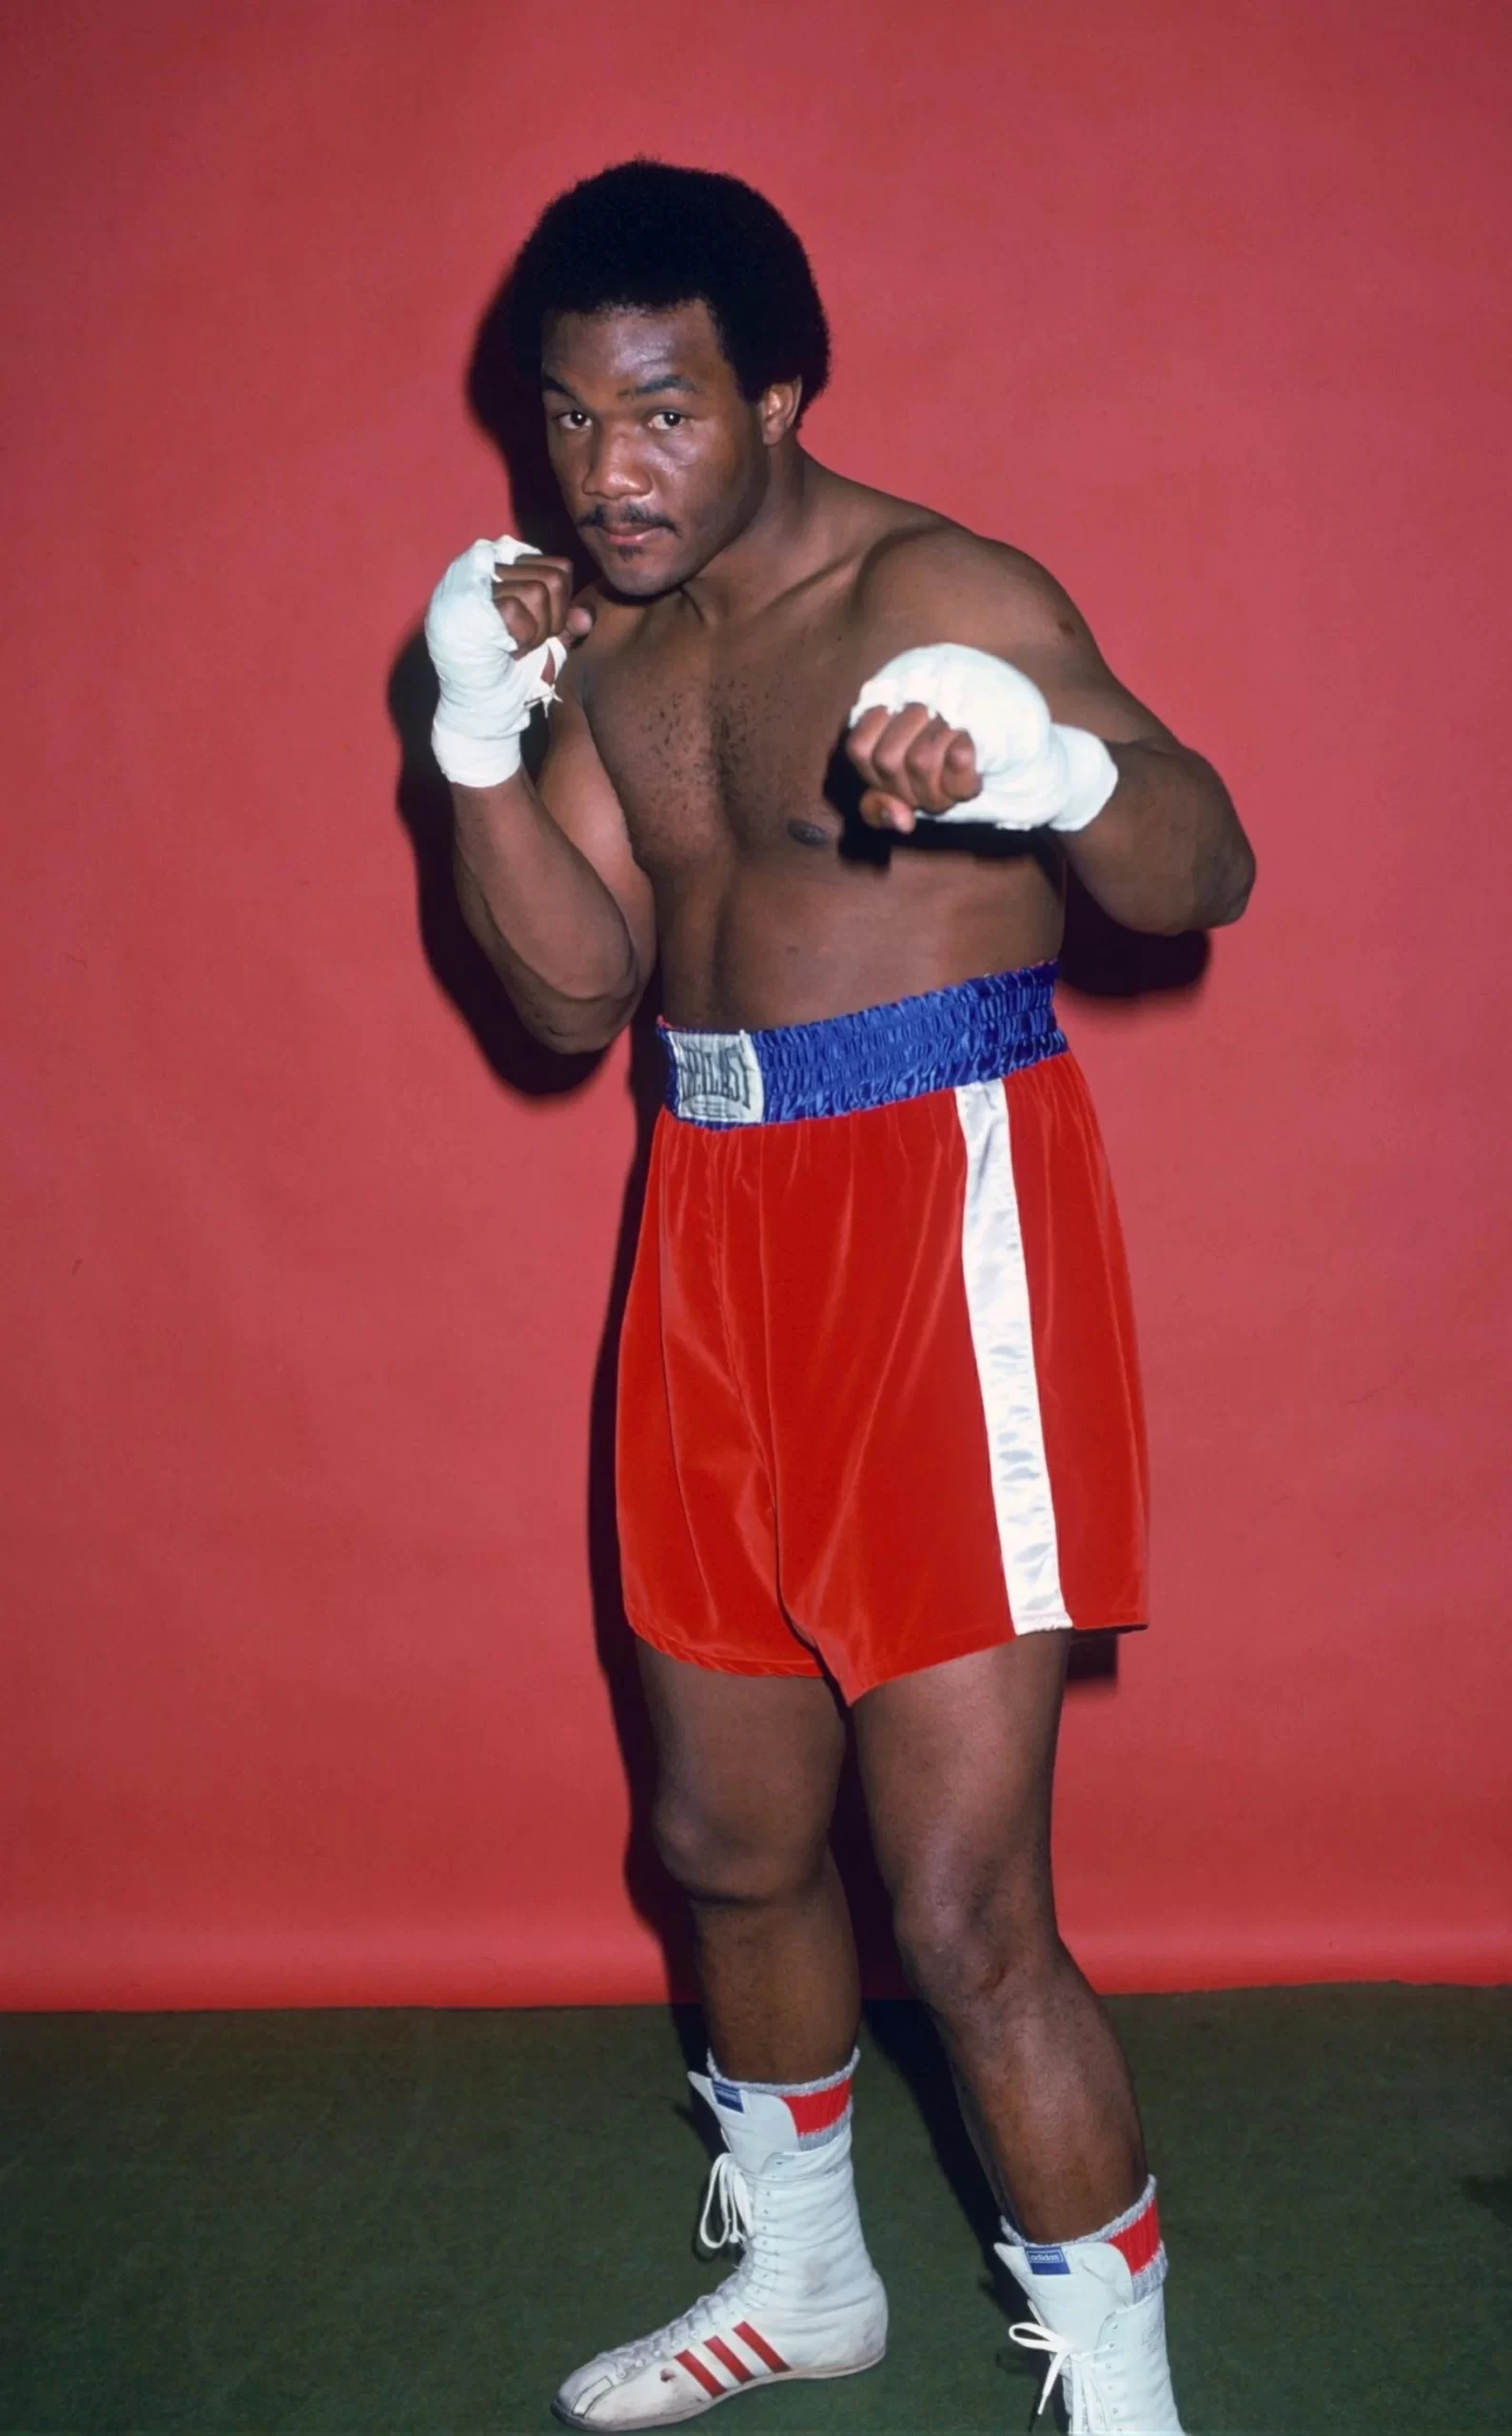 George Foreman Went From Being A Mugger To Olympic Gold Medallist And World Boxing Champ 